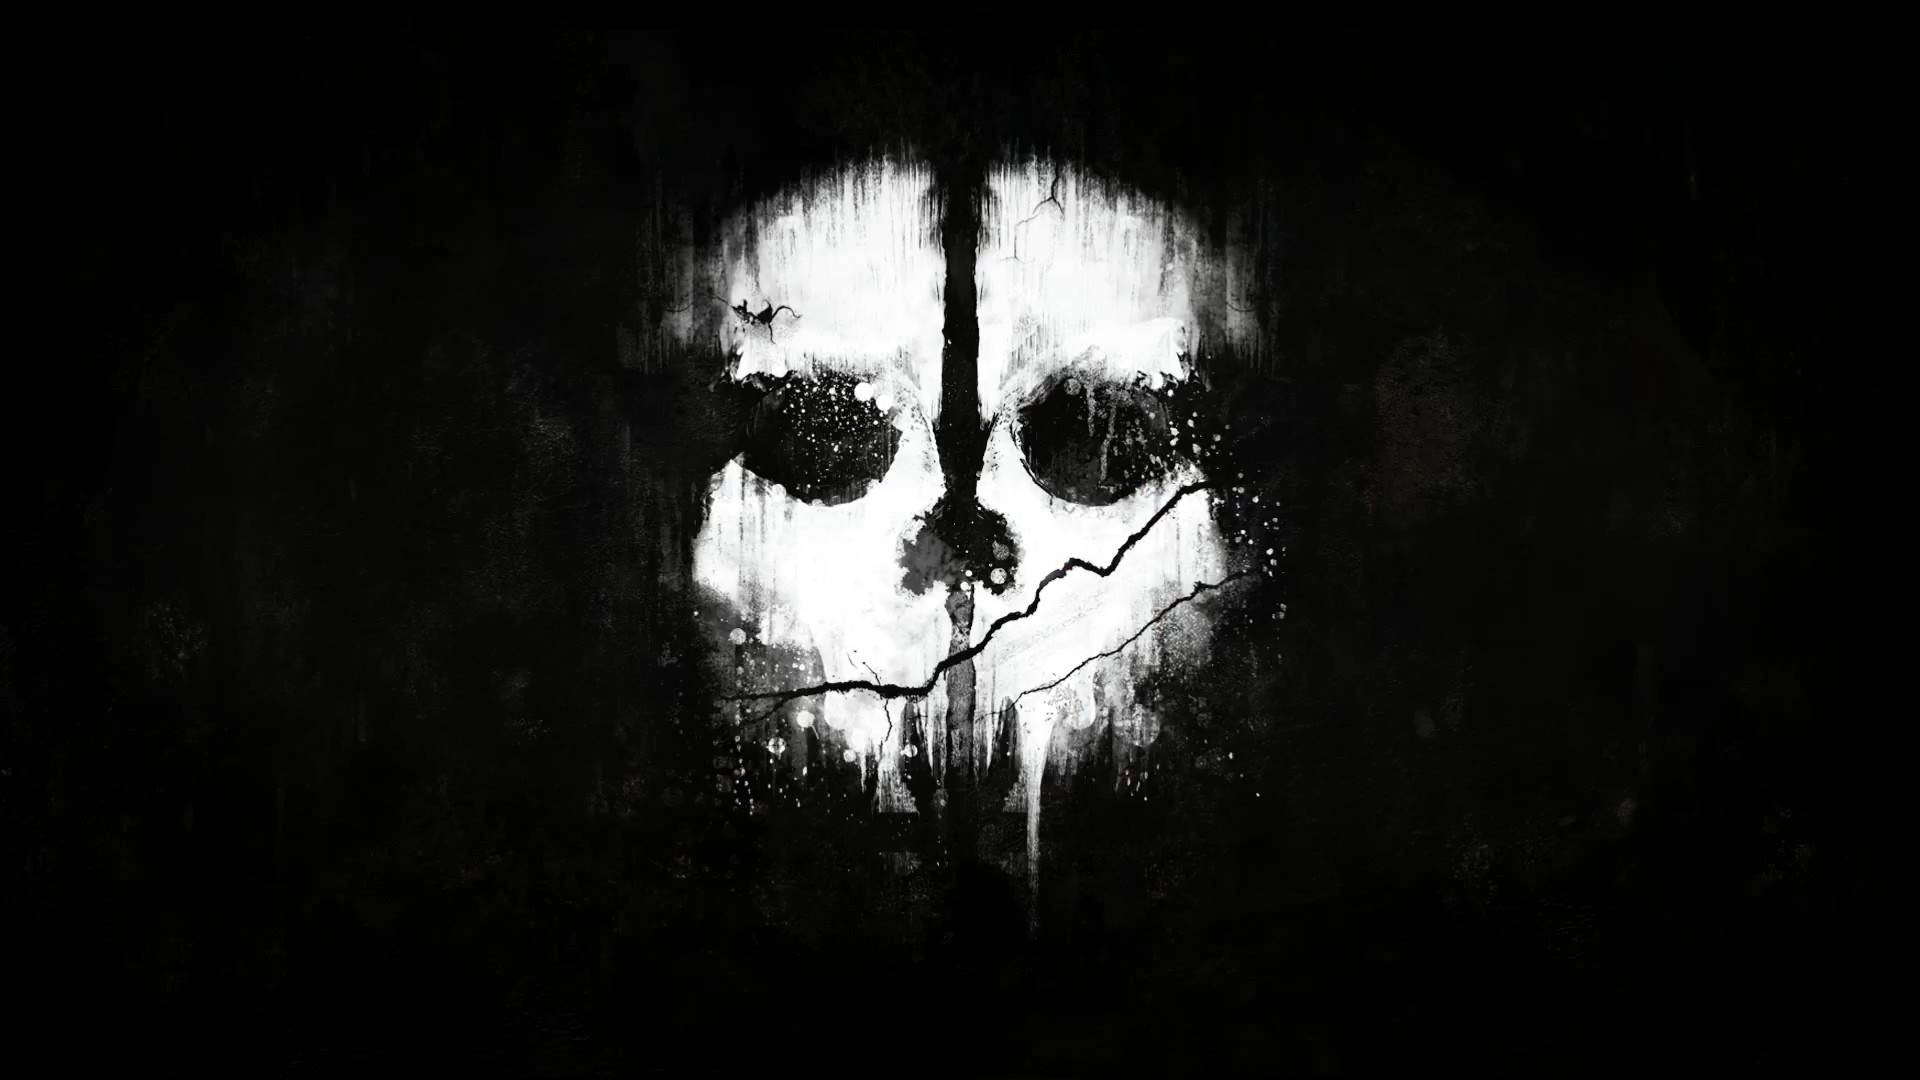  wallpaper 1080pCall Of Duty Ghost 1080p Wallpaper Cool Games Wallpaper